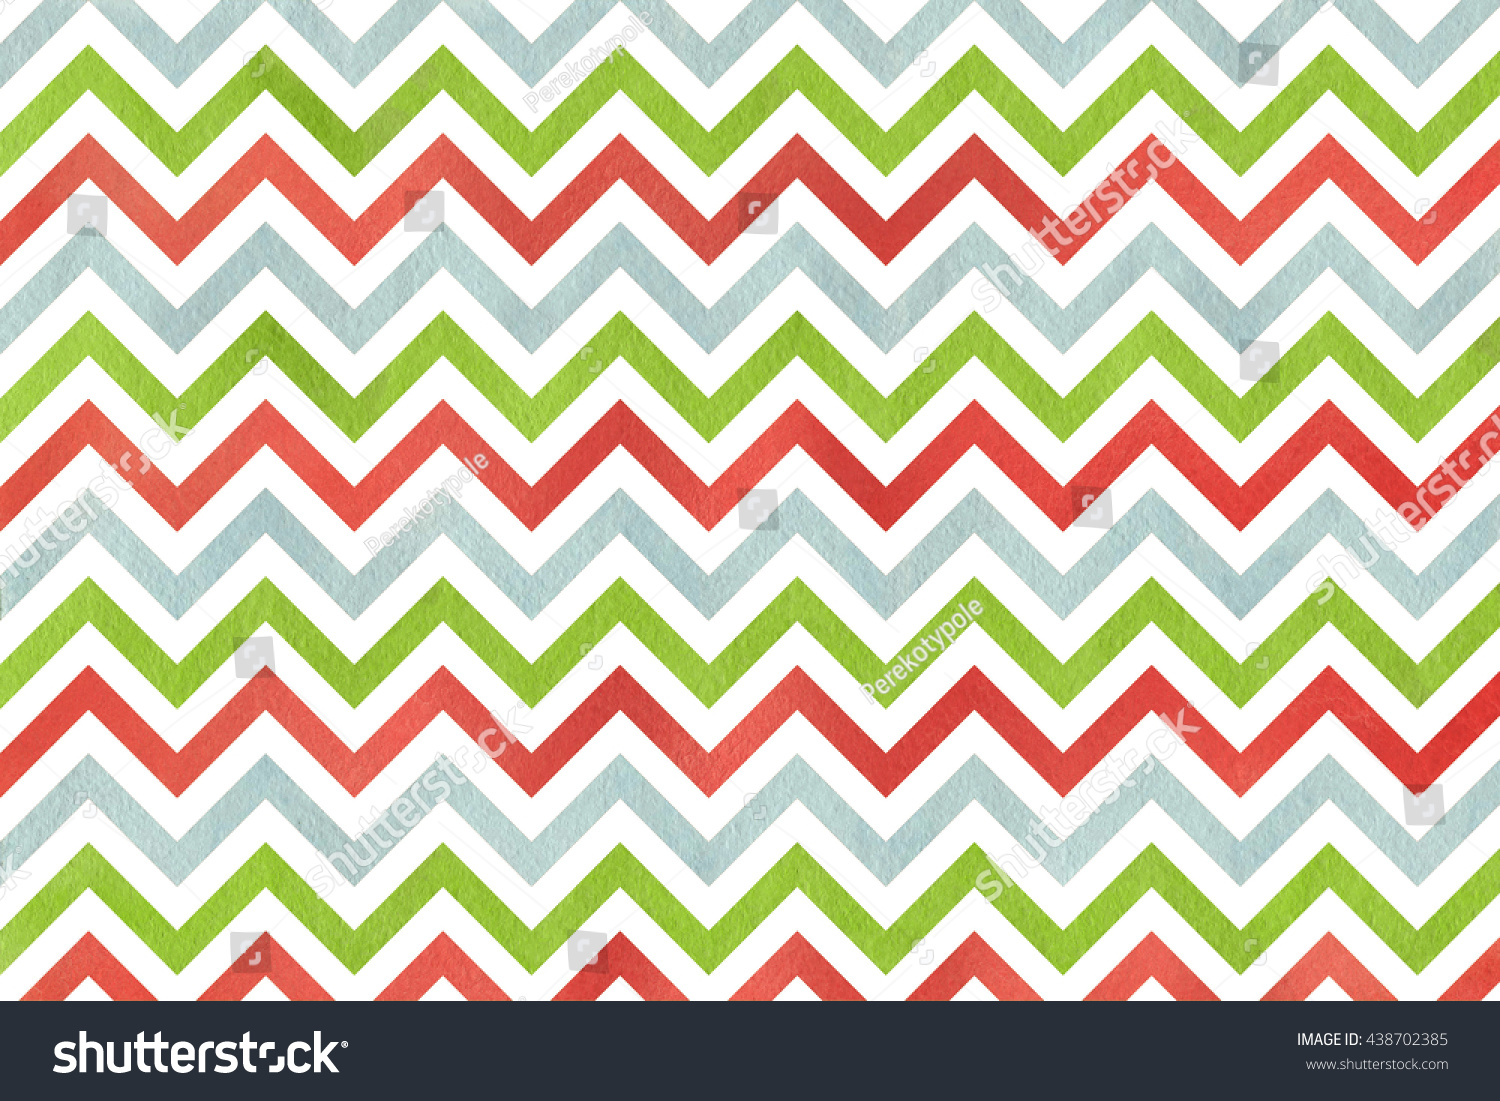 red and green chevron background